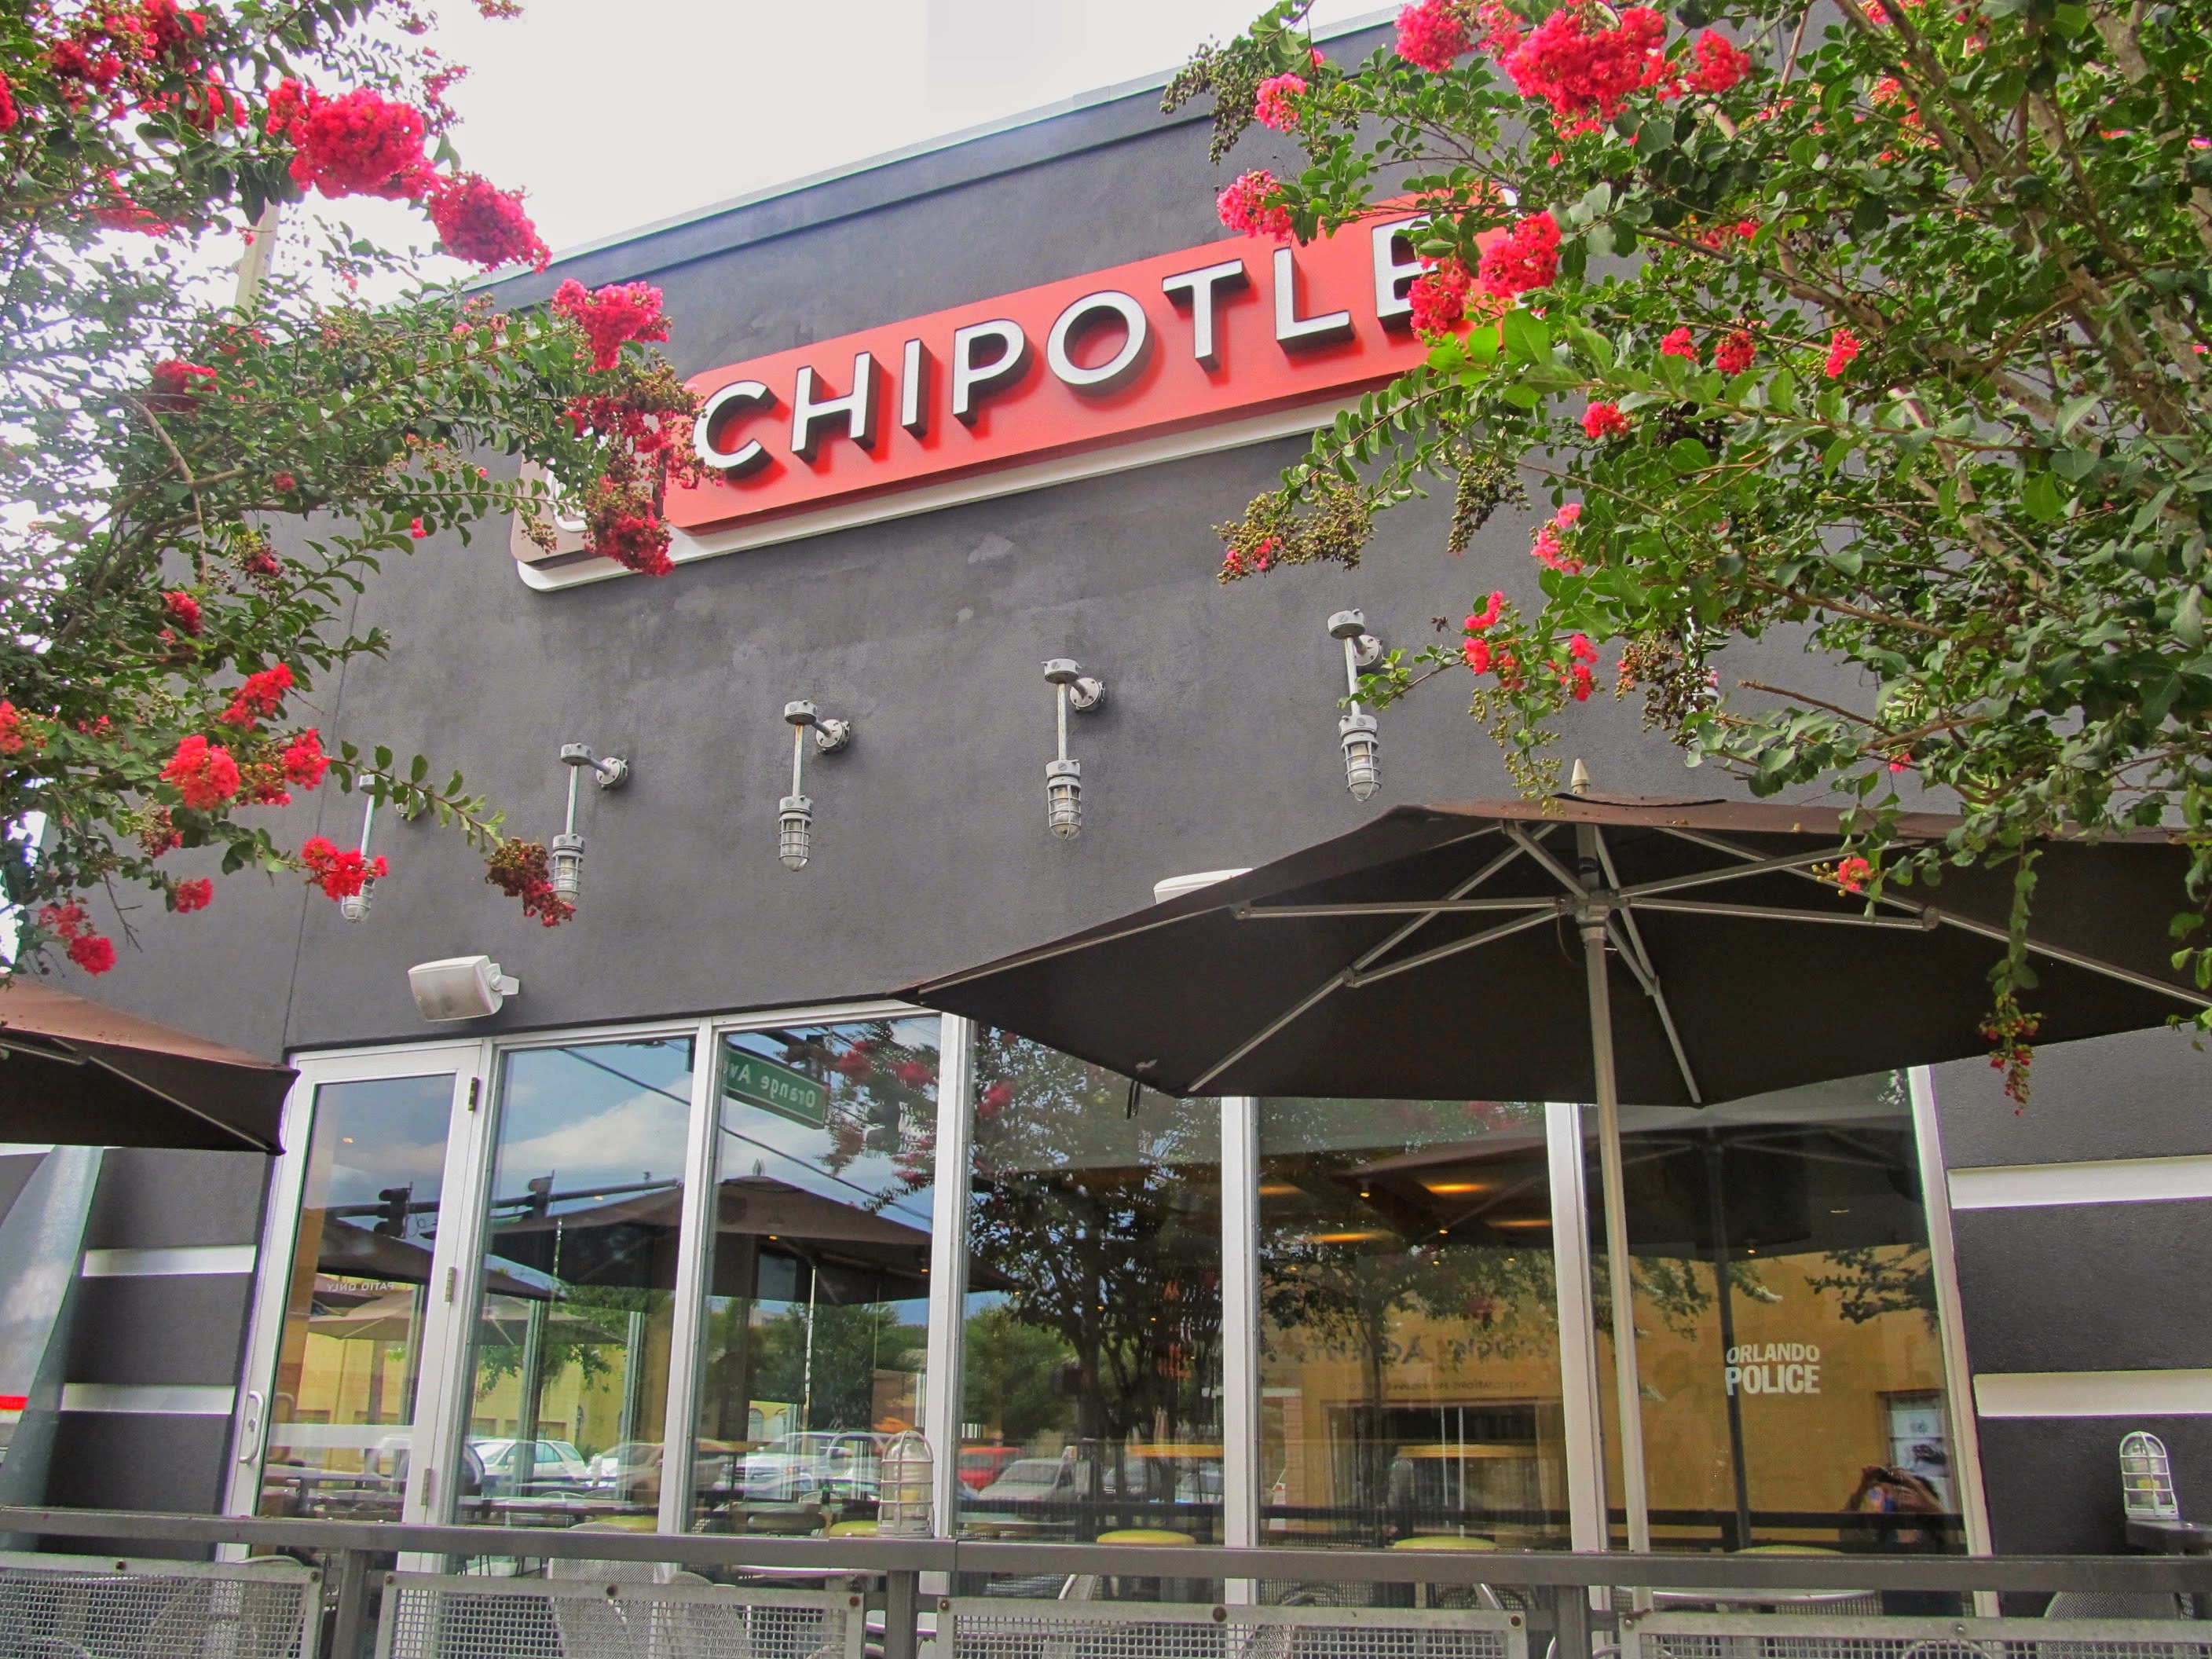 Chipotle agrees to pay $25 million fine related to foodborne illness outbreaks